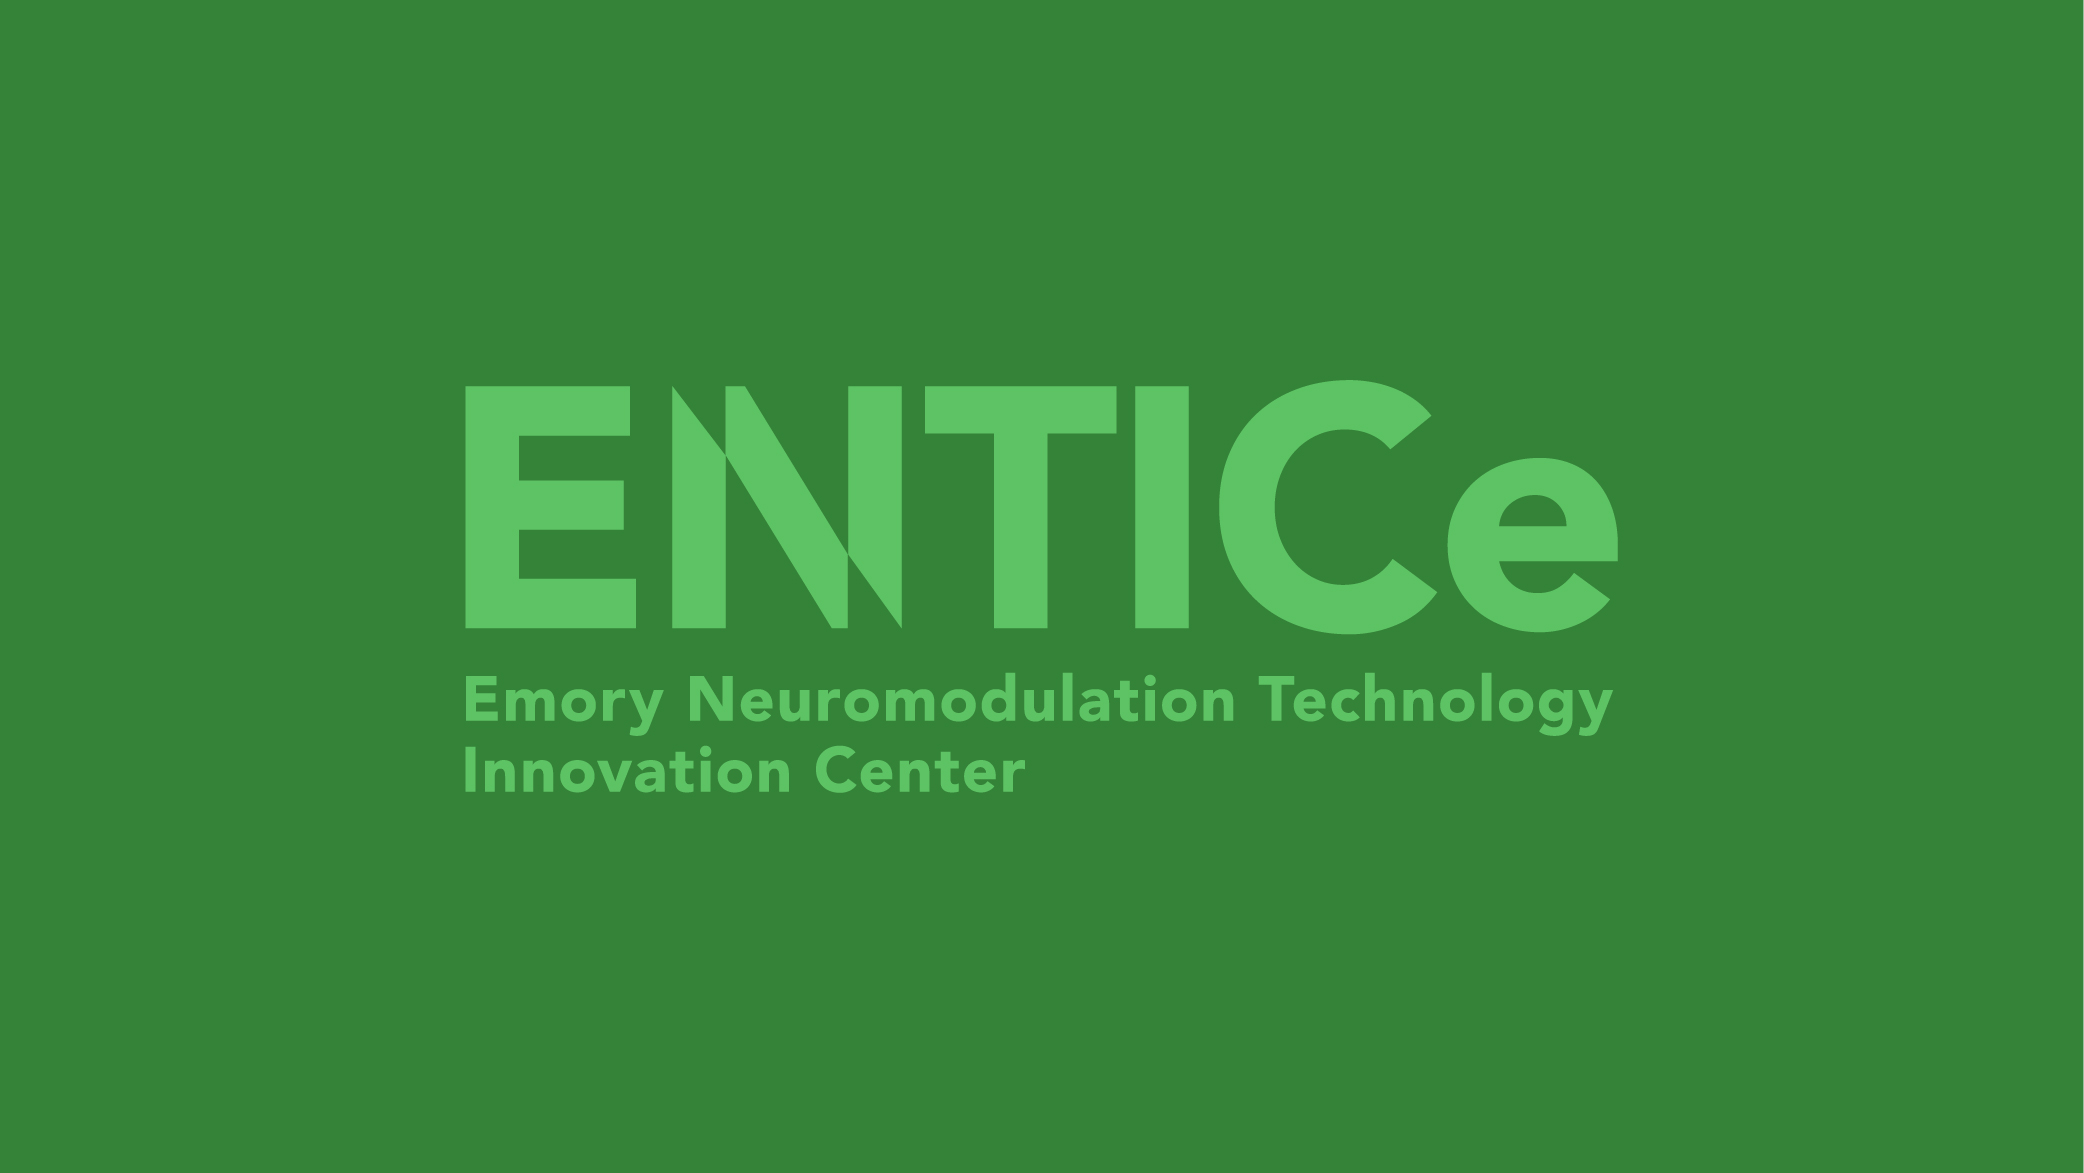 ENTICe logo on green background